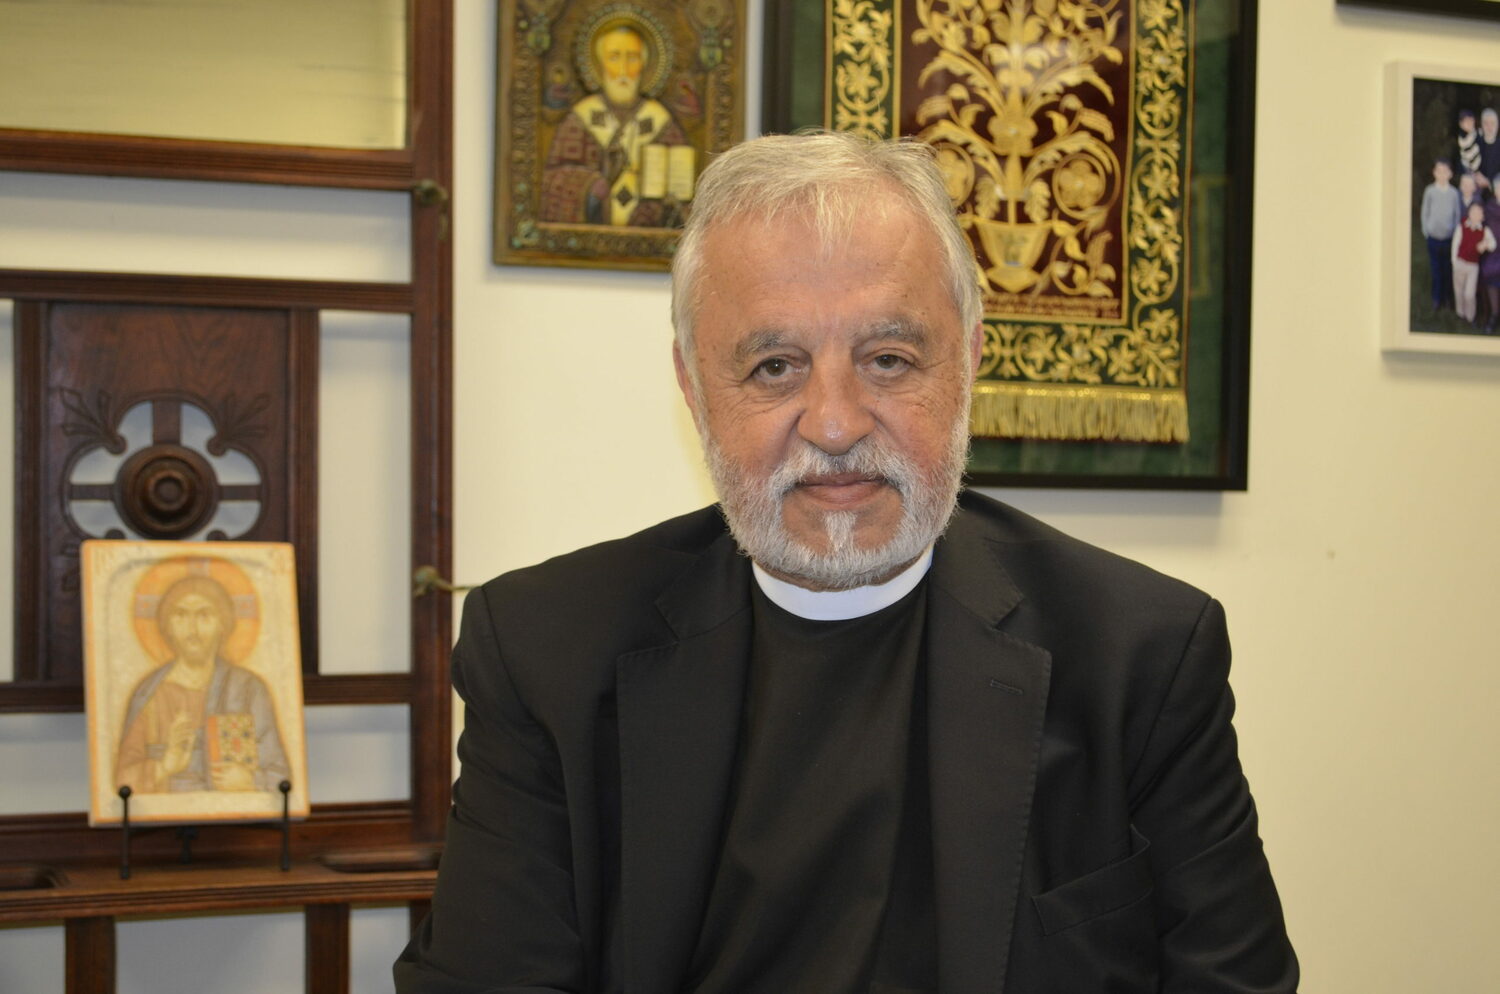 Father Alex Karloutsos of the Dormition of the Virgin Mary Greek Orthodox Church of the Hamptons.